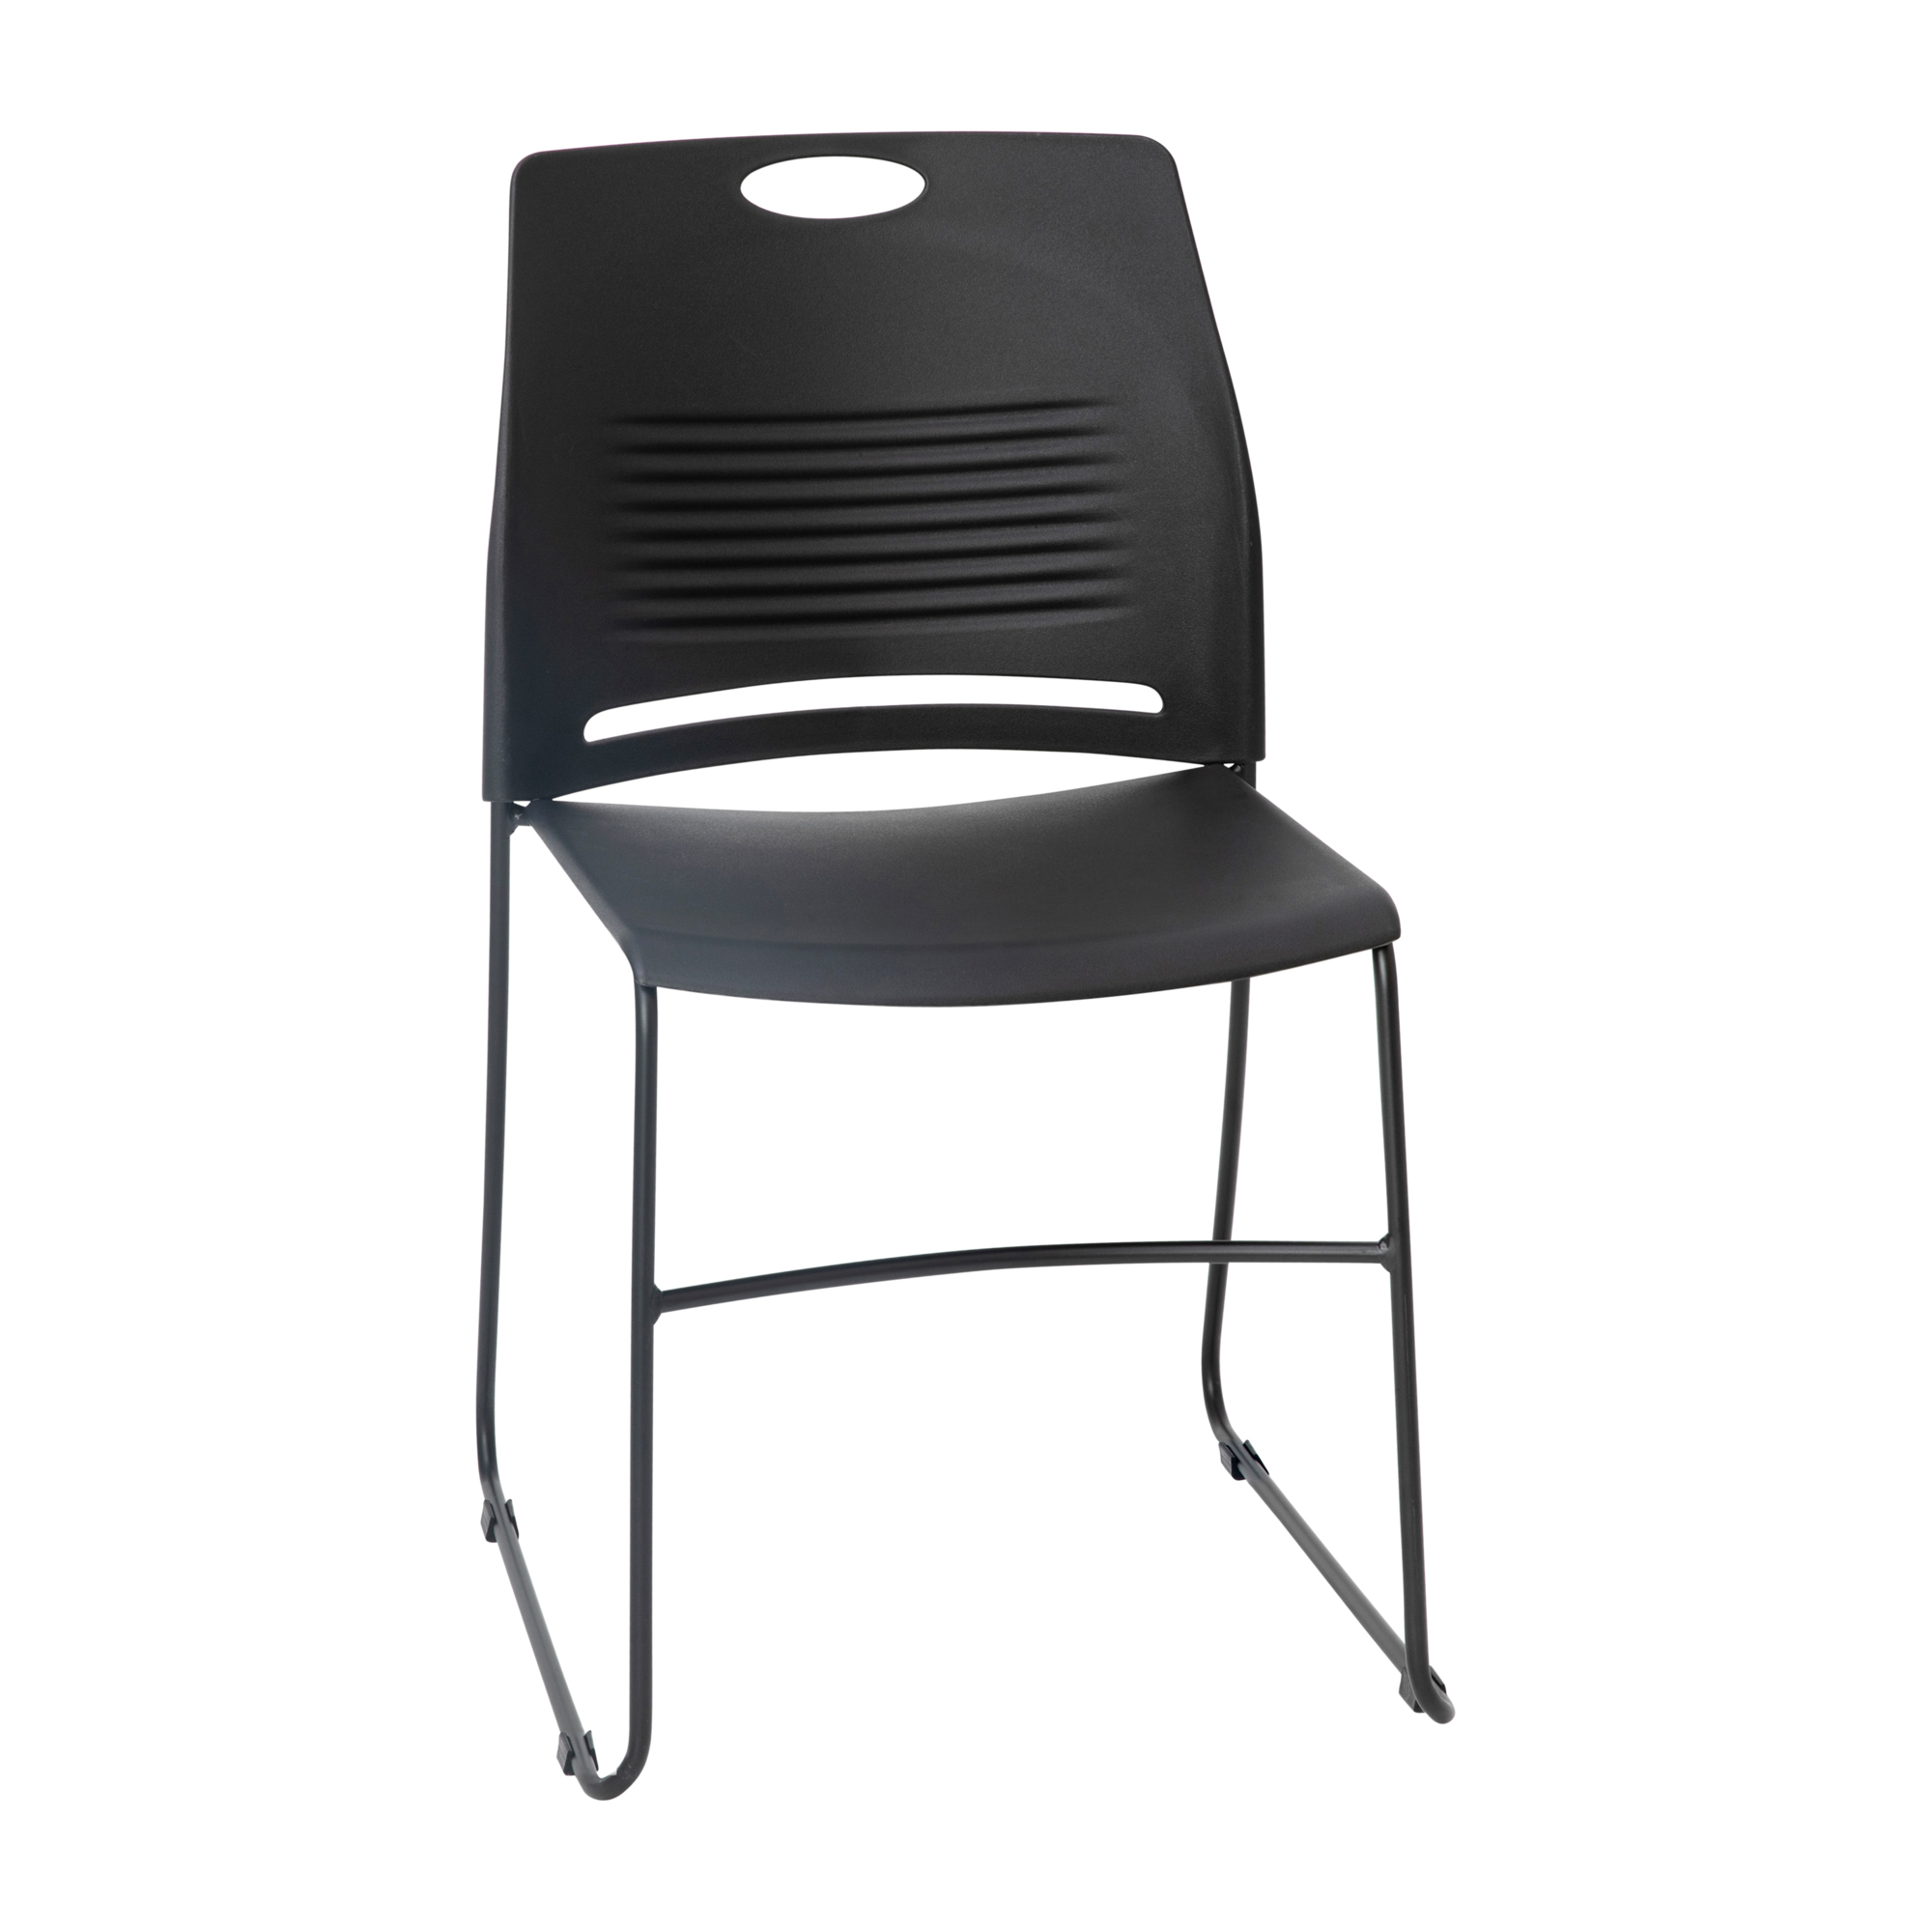 Flash Furniture, Black Plastic Stack Chair with Steel Sled Base, Primary Color Black, Included (qty.) 1, Model RUTNC499ABK